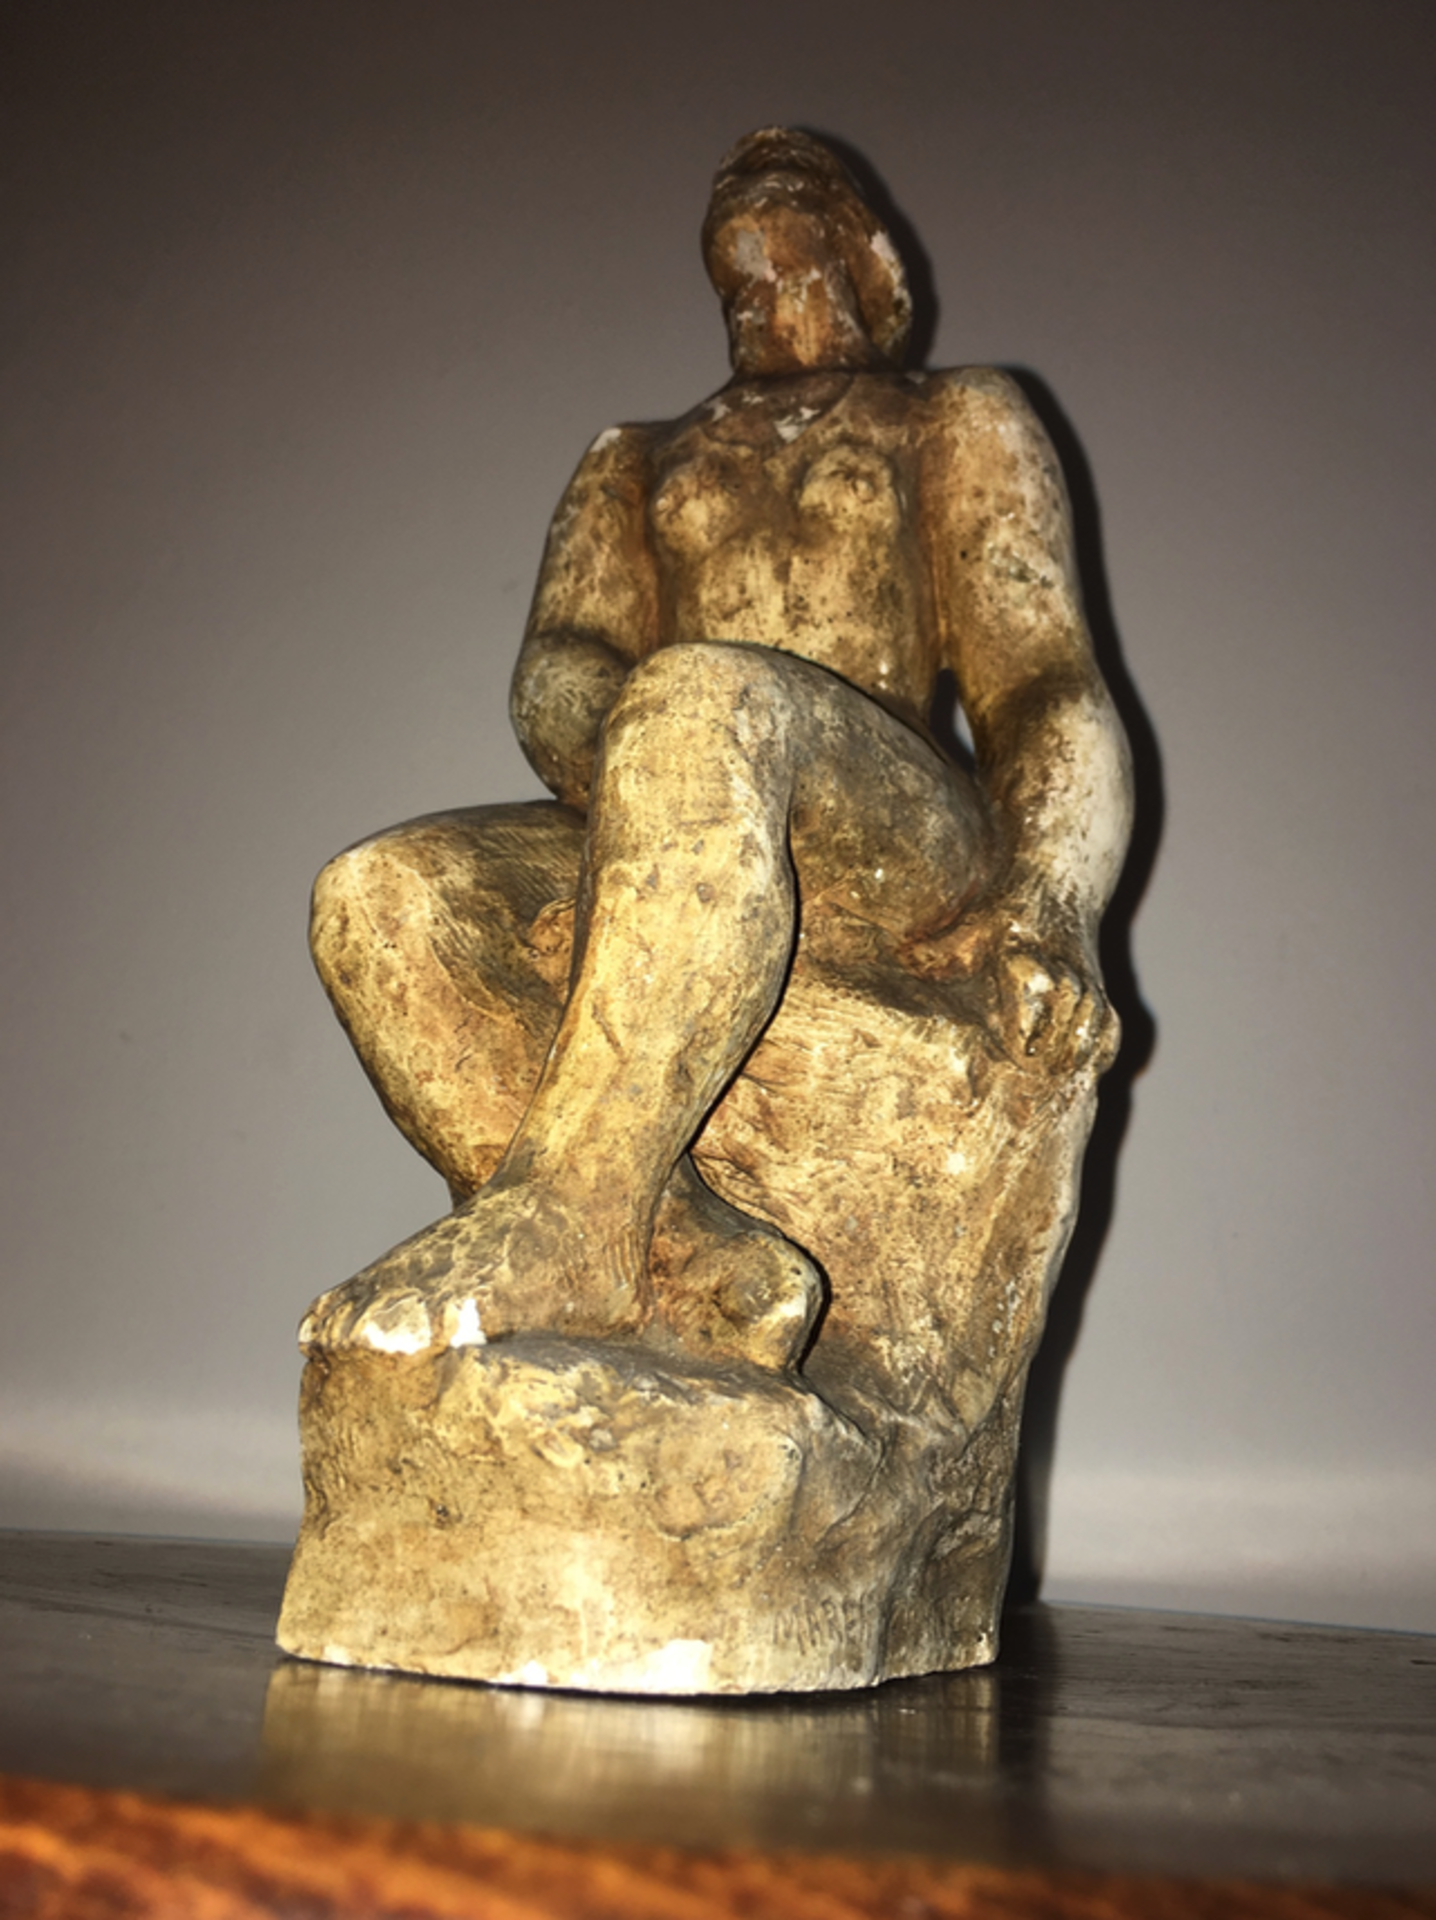 Seated female plaster sculpture signed by Marek Szwarc 1892-1958